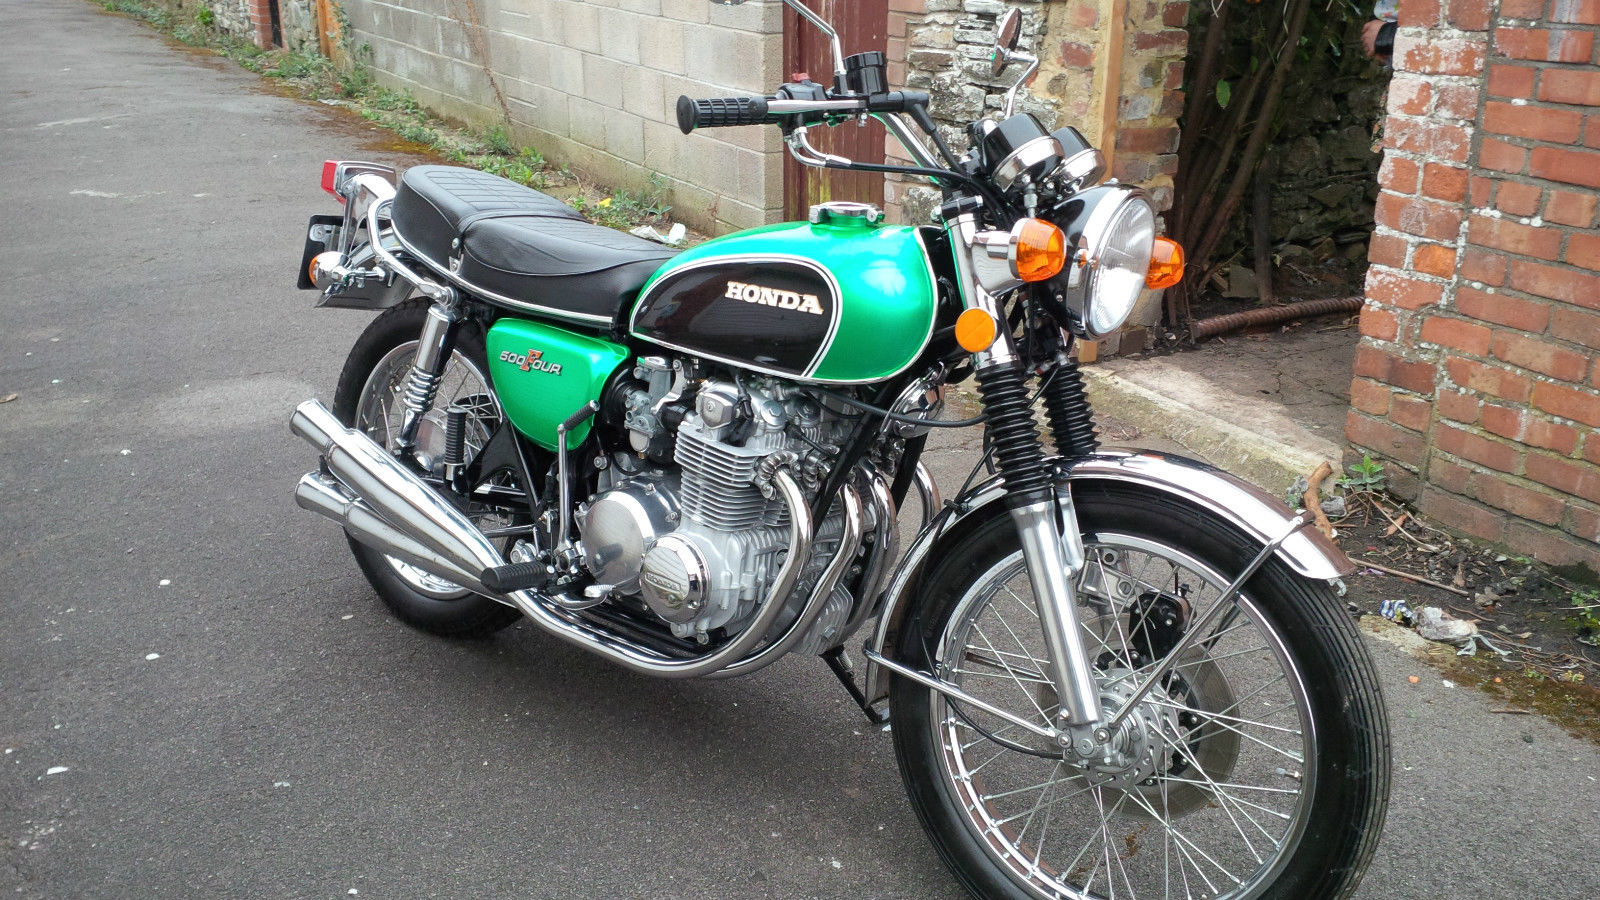 Honda CB500 Four - 1972 - Right Side View, Wheels, Brakes and Tyres, Forks, Frame, Headlight, Clocks, Mirrors, Exhausts and Kick Start.